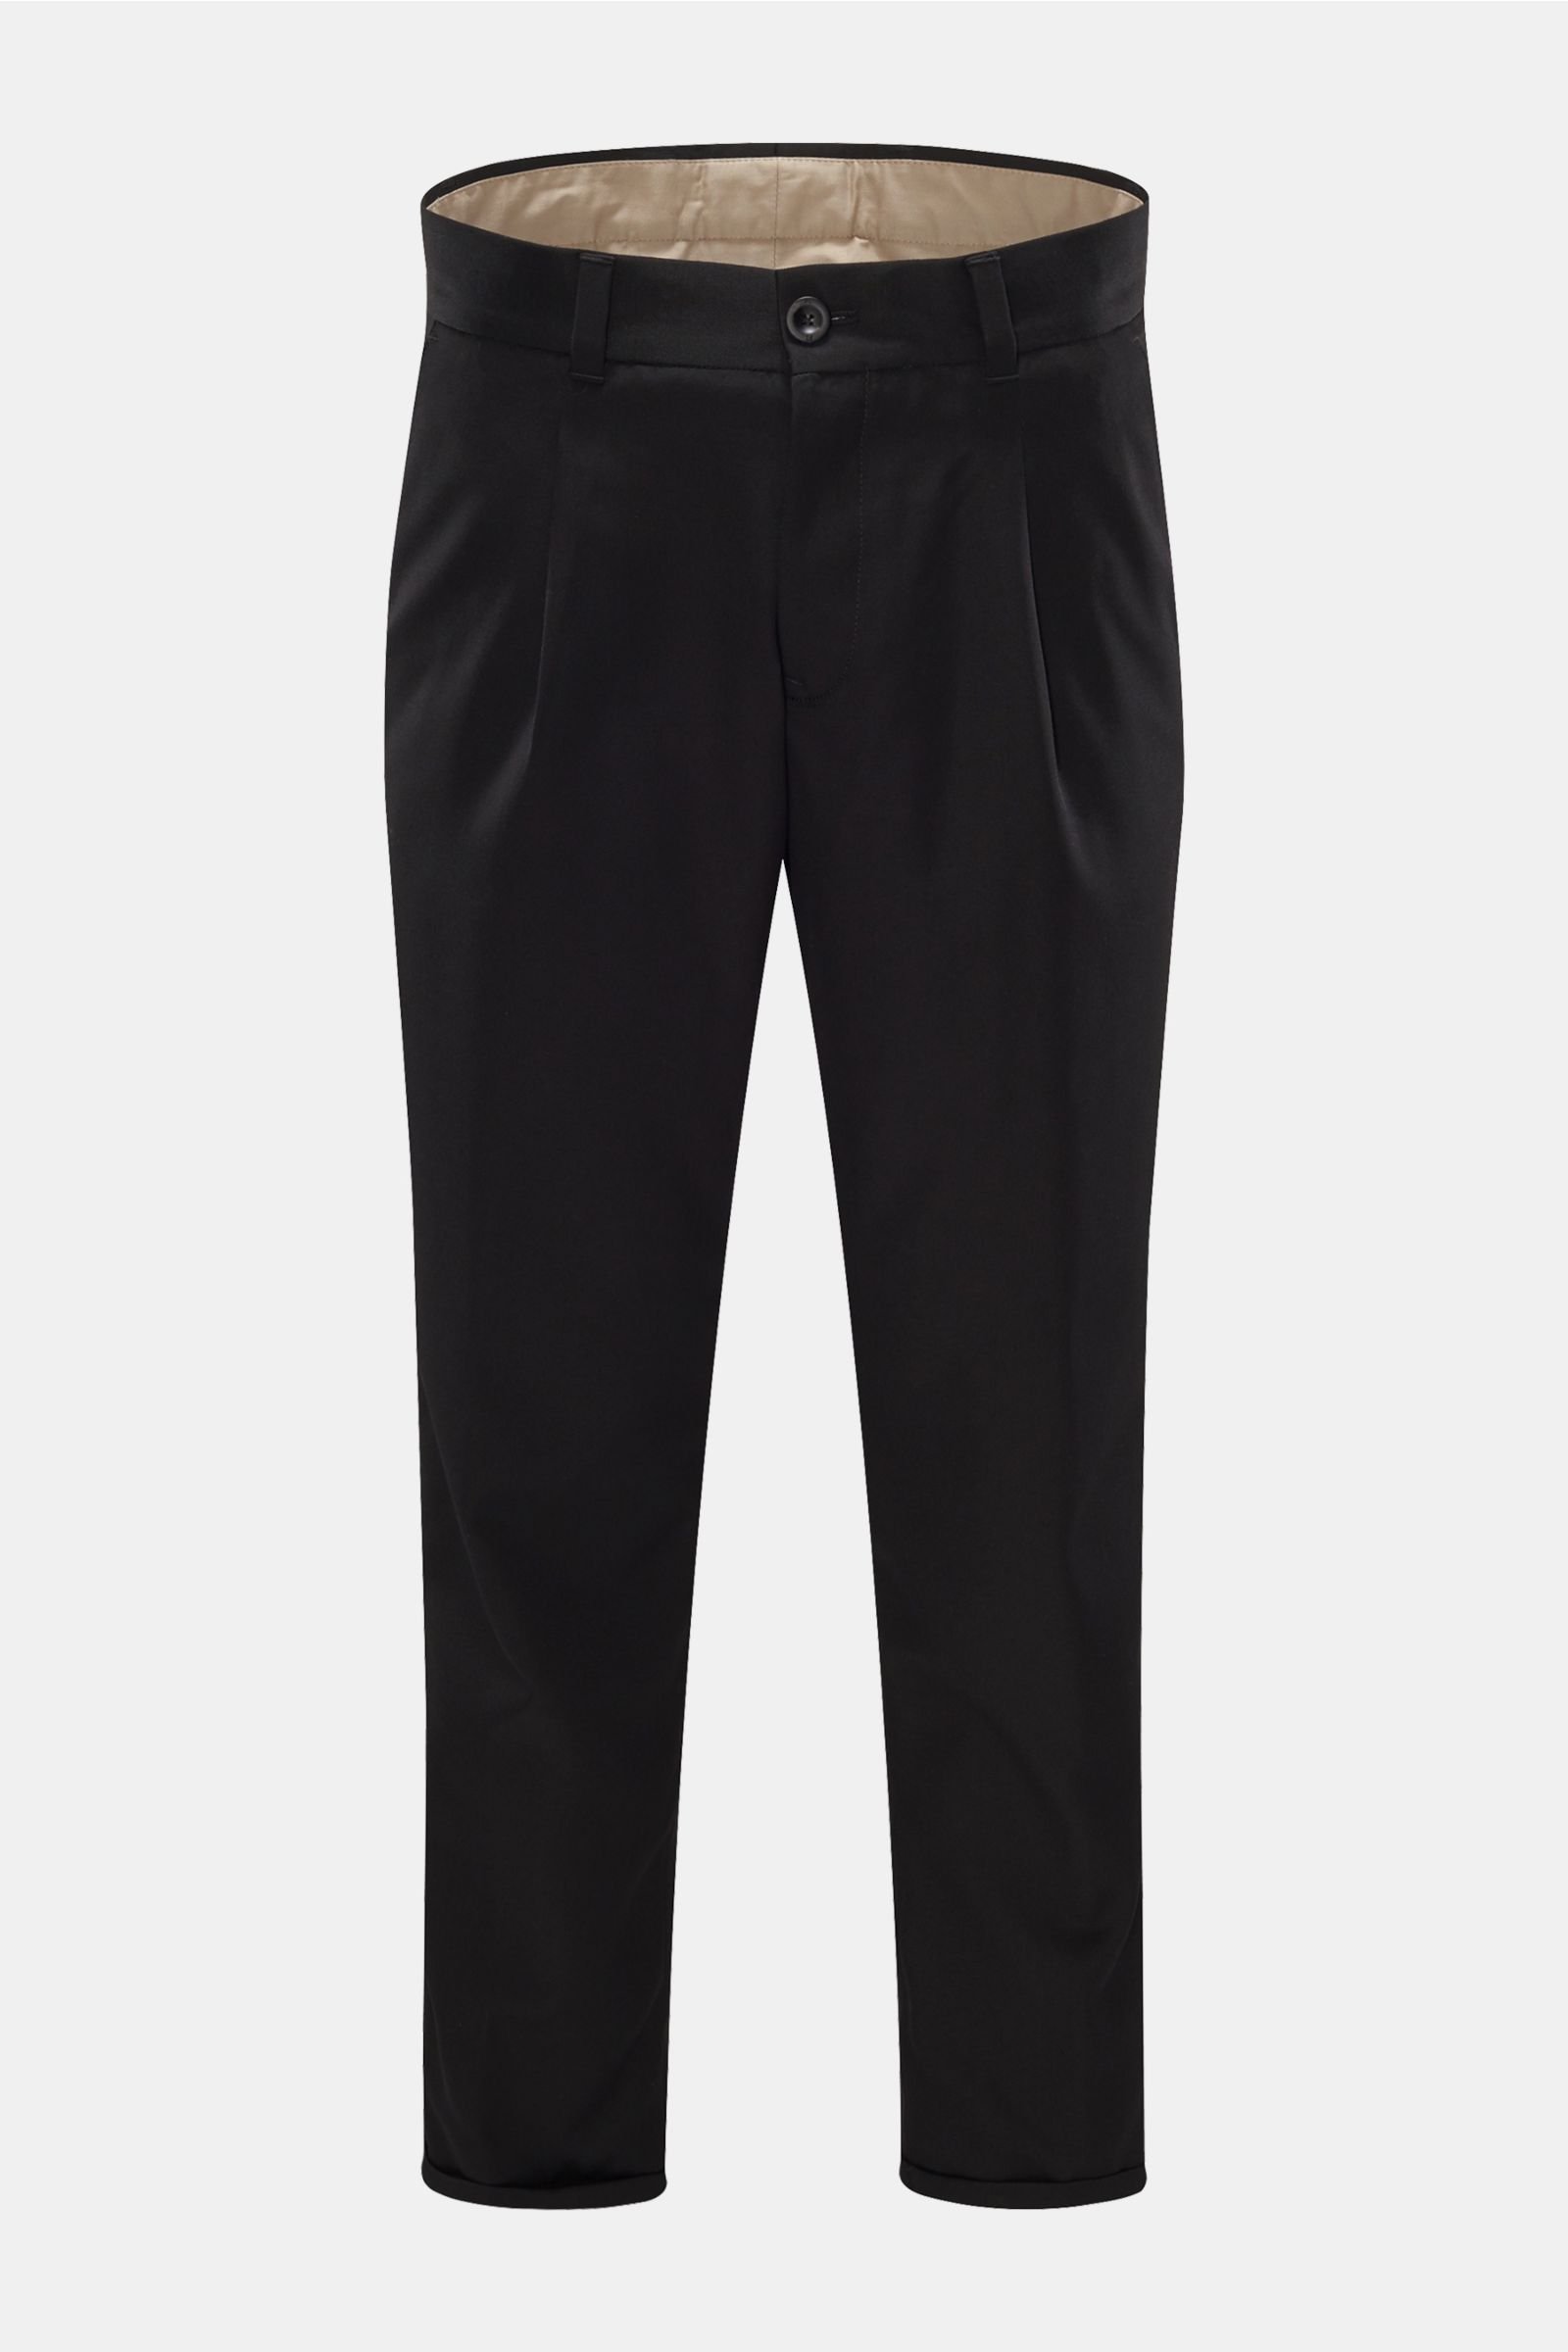 Wool trousers 'Cinque' black